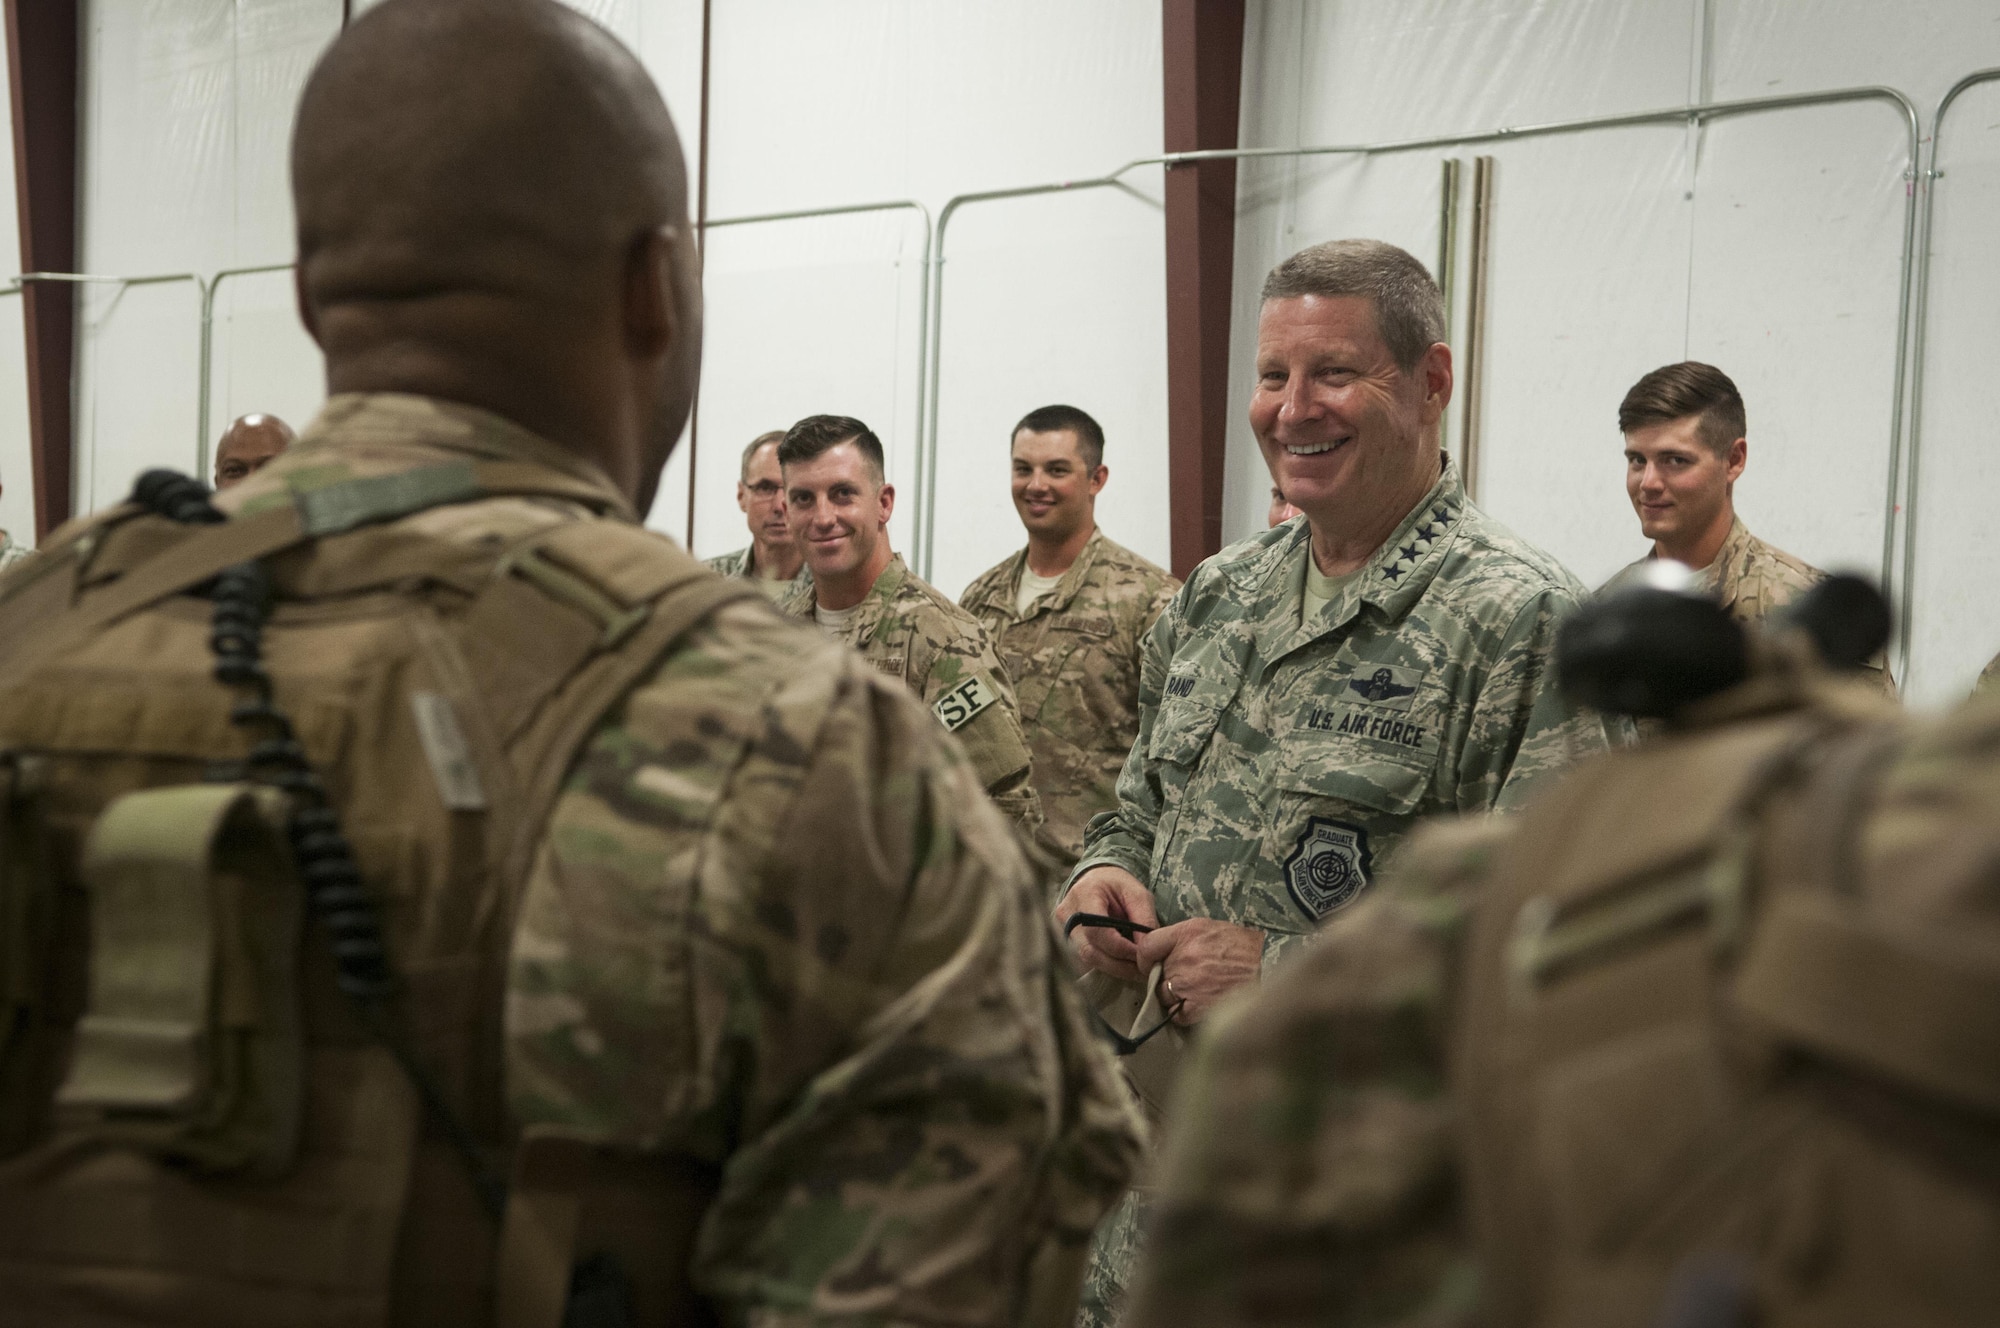 AFGSC Commander Gen. Robin Rand addresses Airmen at the 620th Ground Combat Training Squadron at Camp Guernsey, Wyo., July 21, 2016. Rand’s visit included a stop at the shoot house where Airmen demonstrated their tactical capabilities. (U.S. Air Force photo by Senior Airman Malcolm Mayfield)